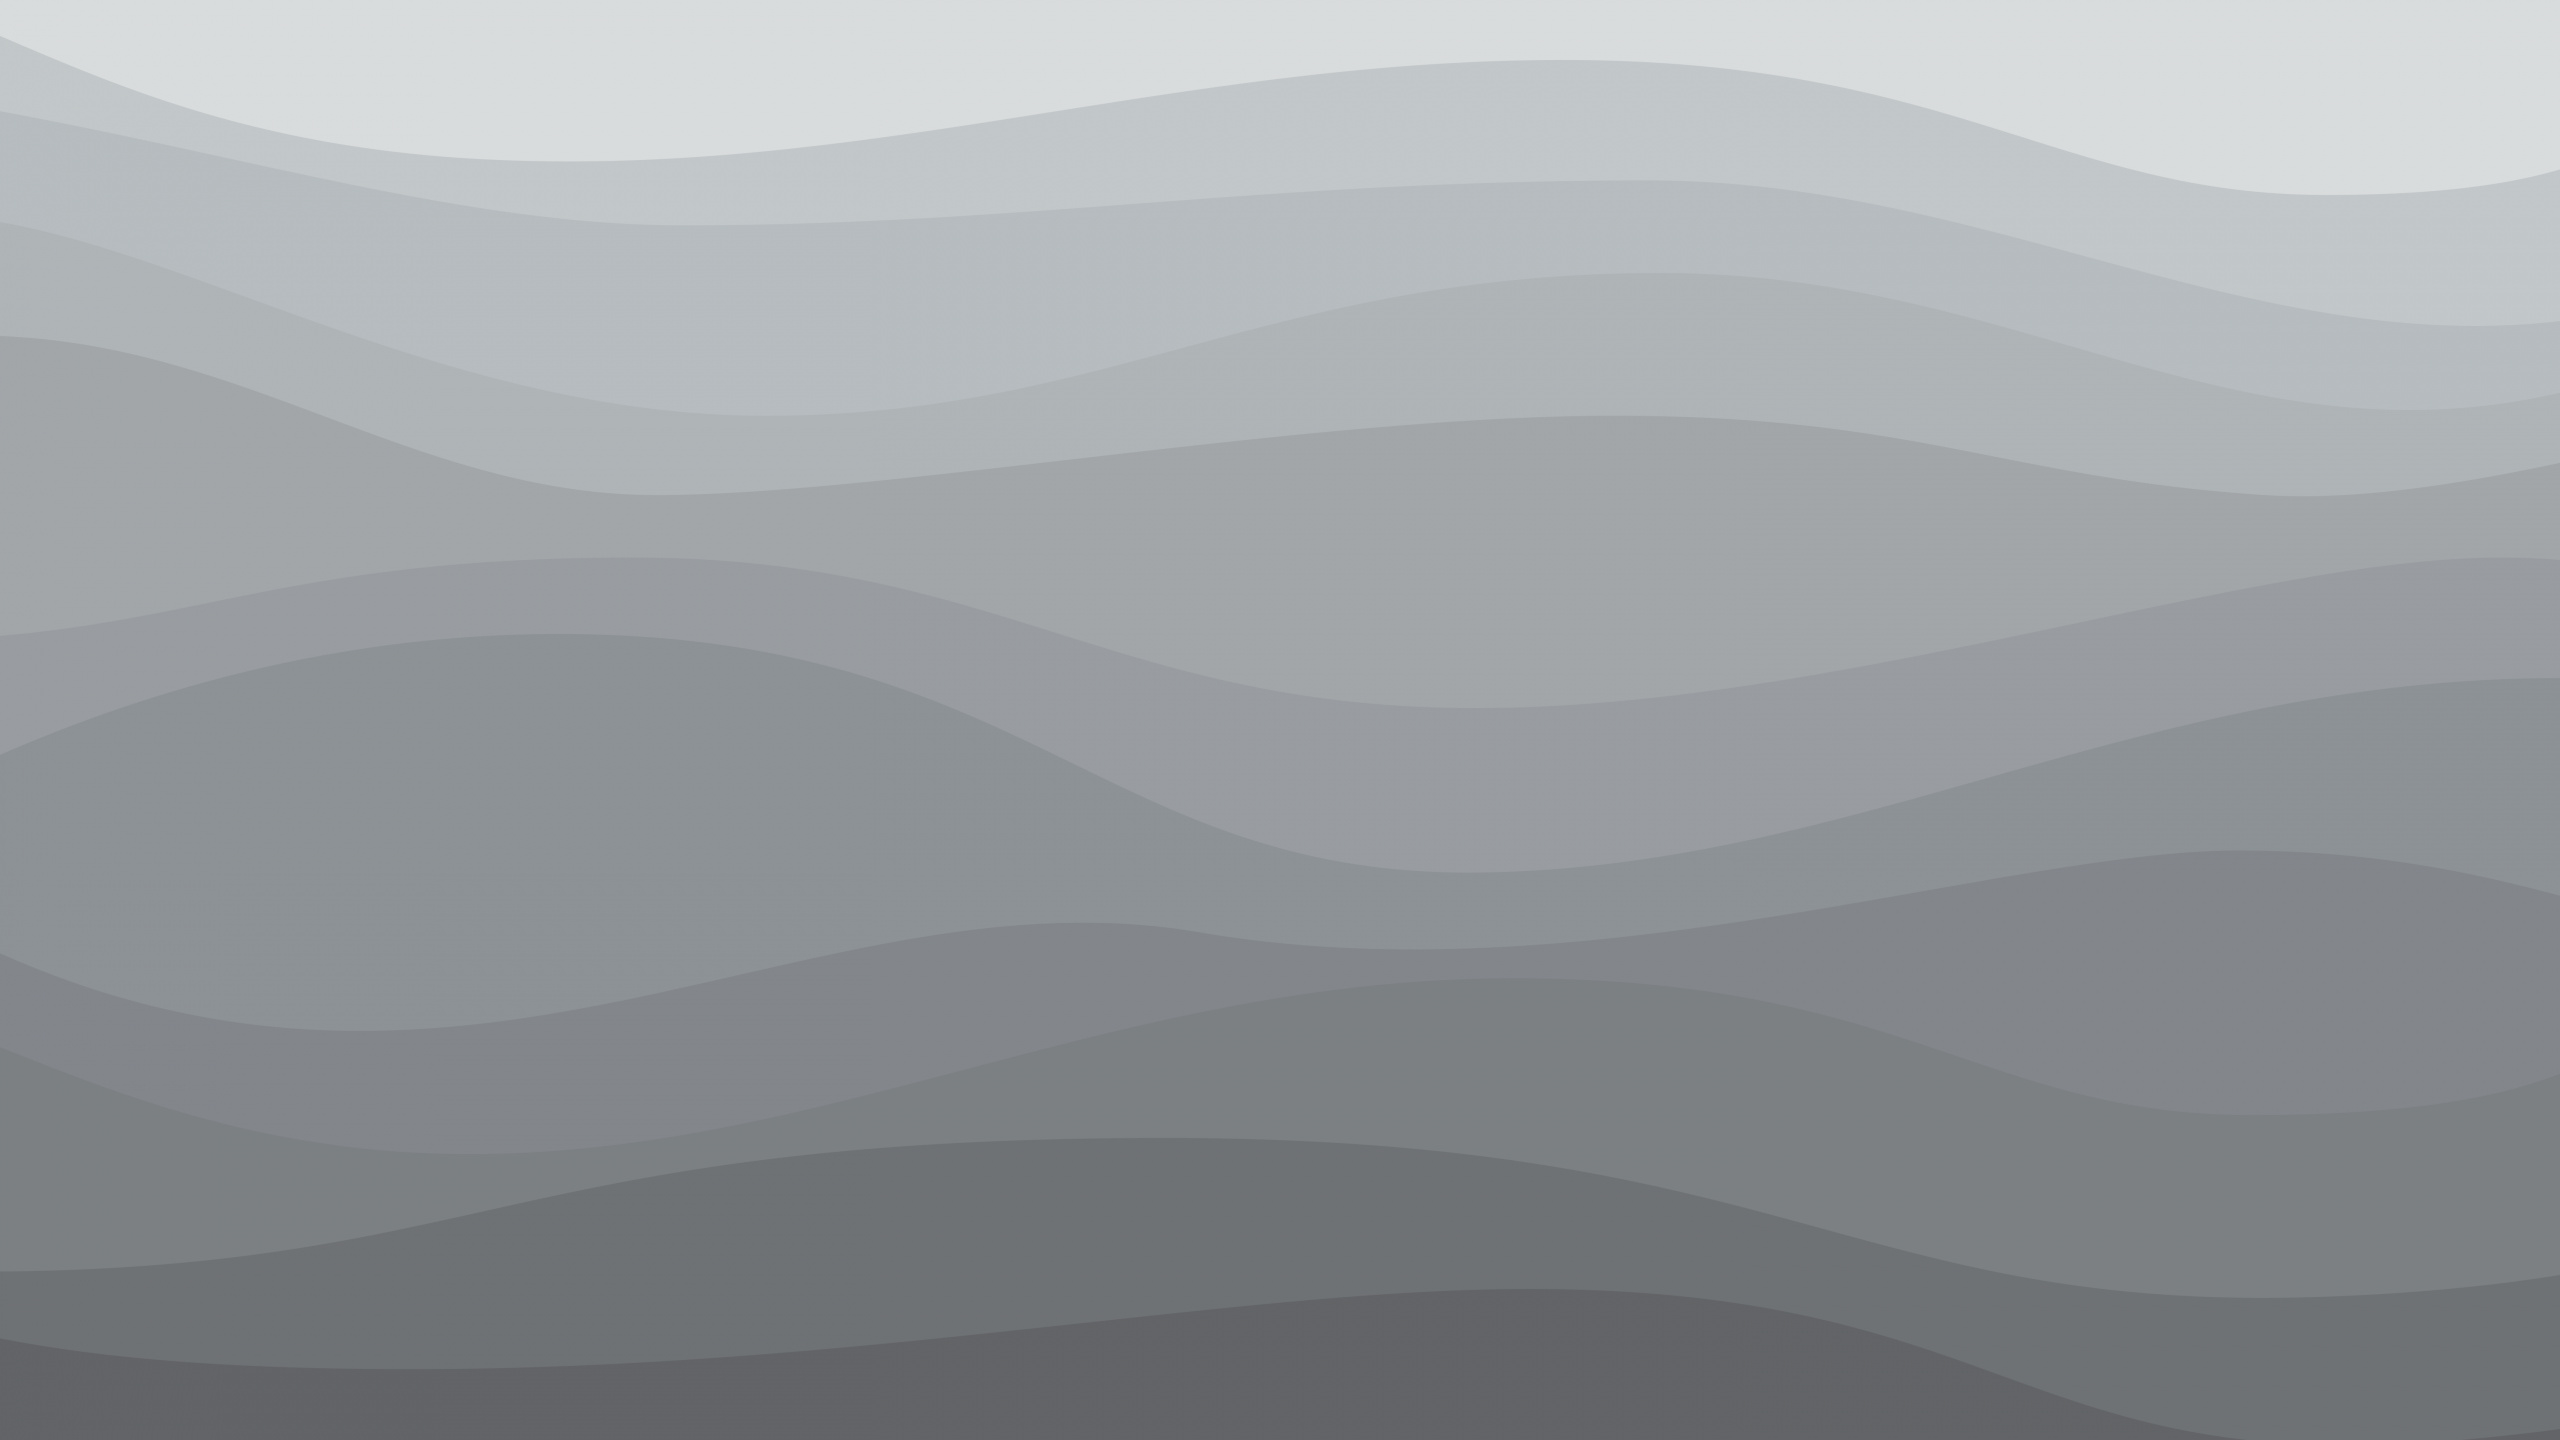 Grey WQHD, QHD, 16:9 Wallpapers, HD Grey 2560x1440 Backgrounds, Free Images  Download